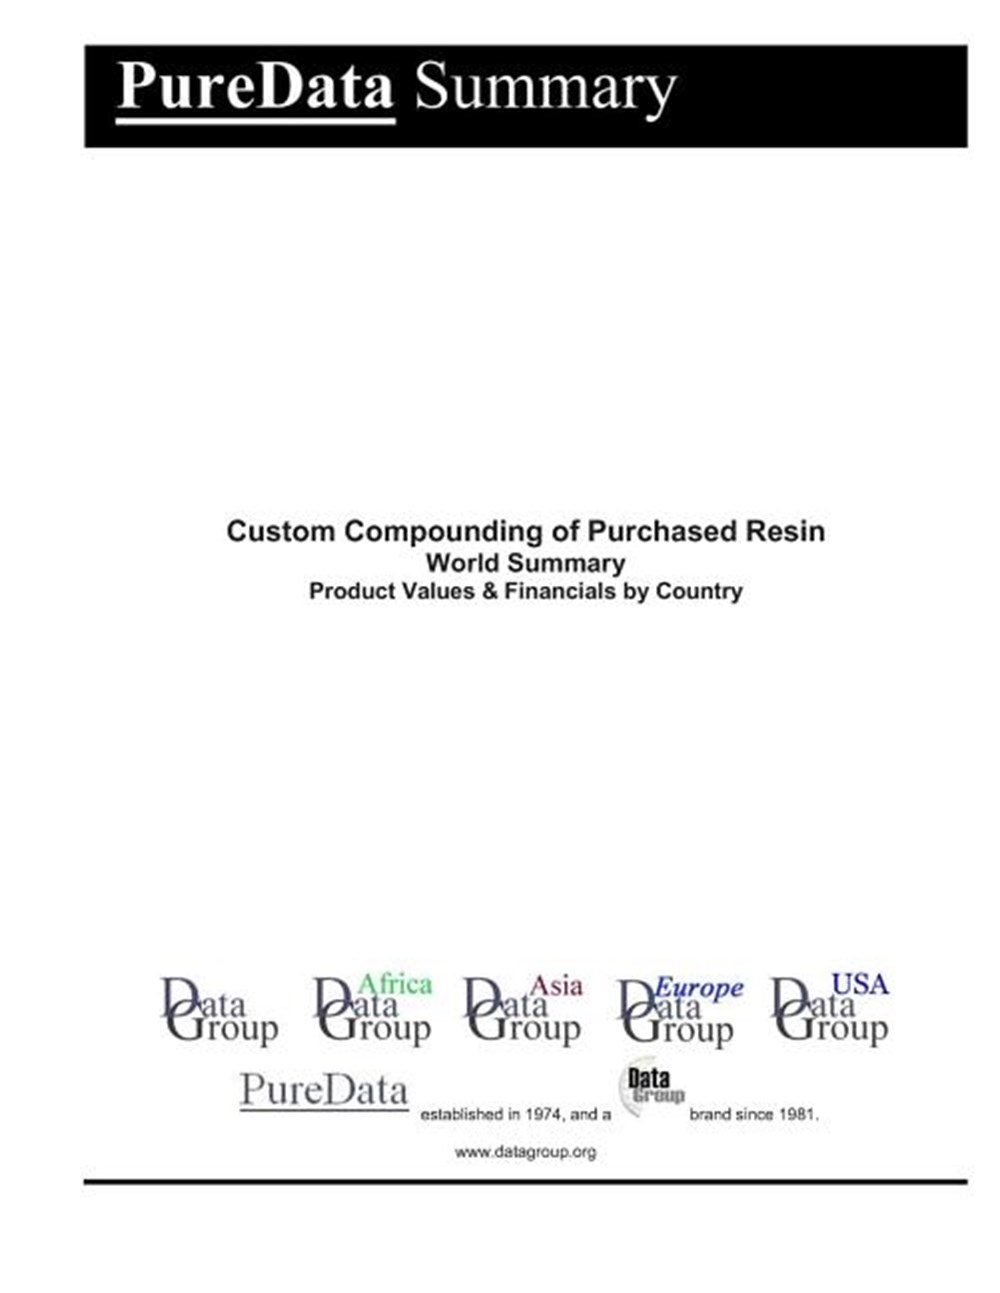 Custom Compounding of Purchased Resin World Summary Product Values & Financials by Country